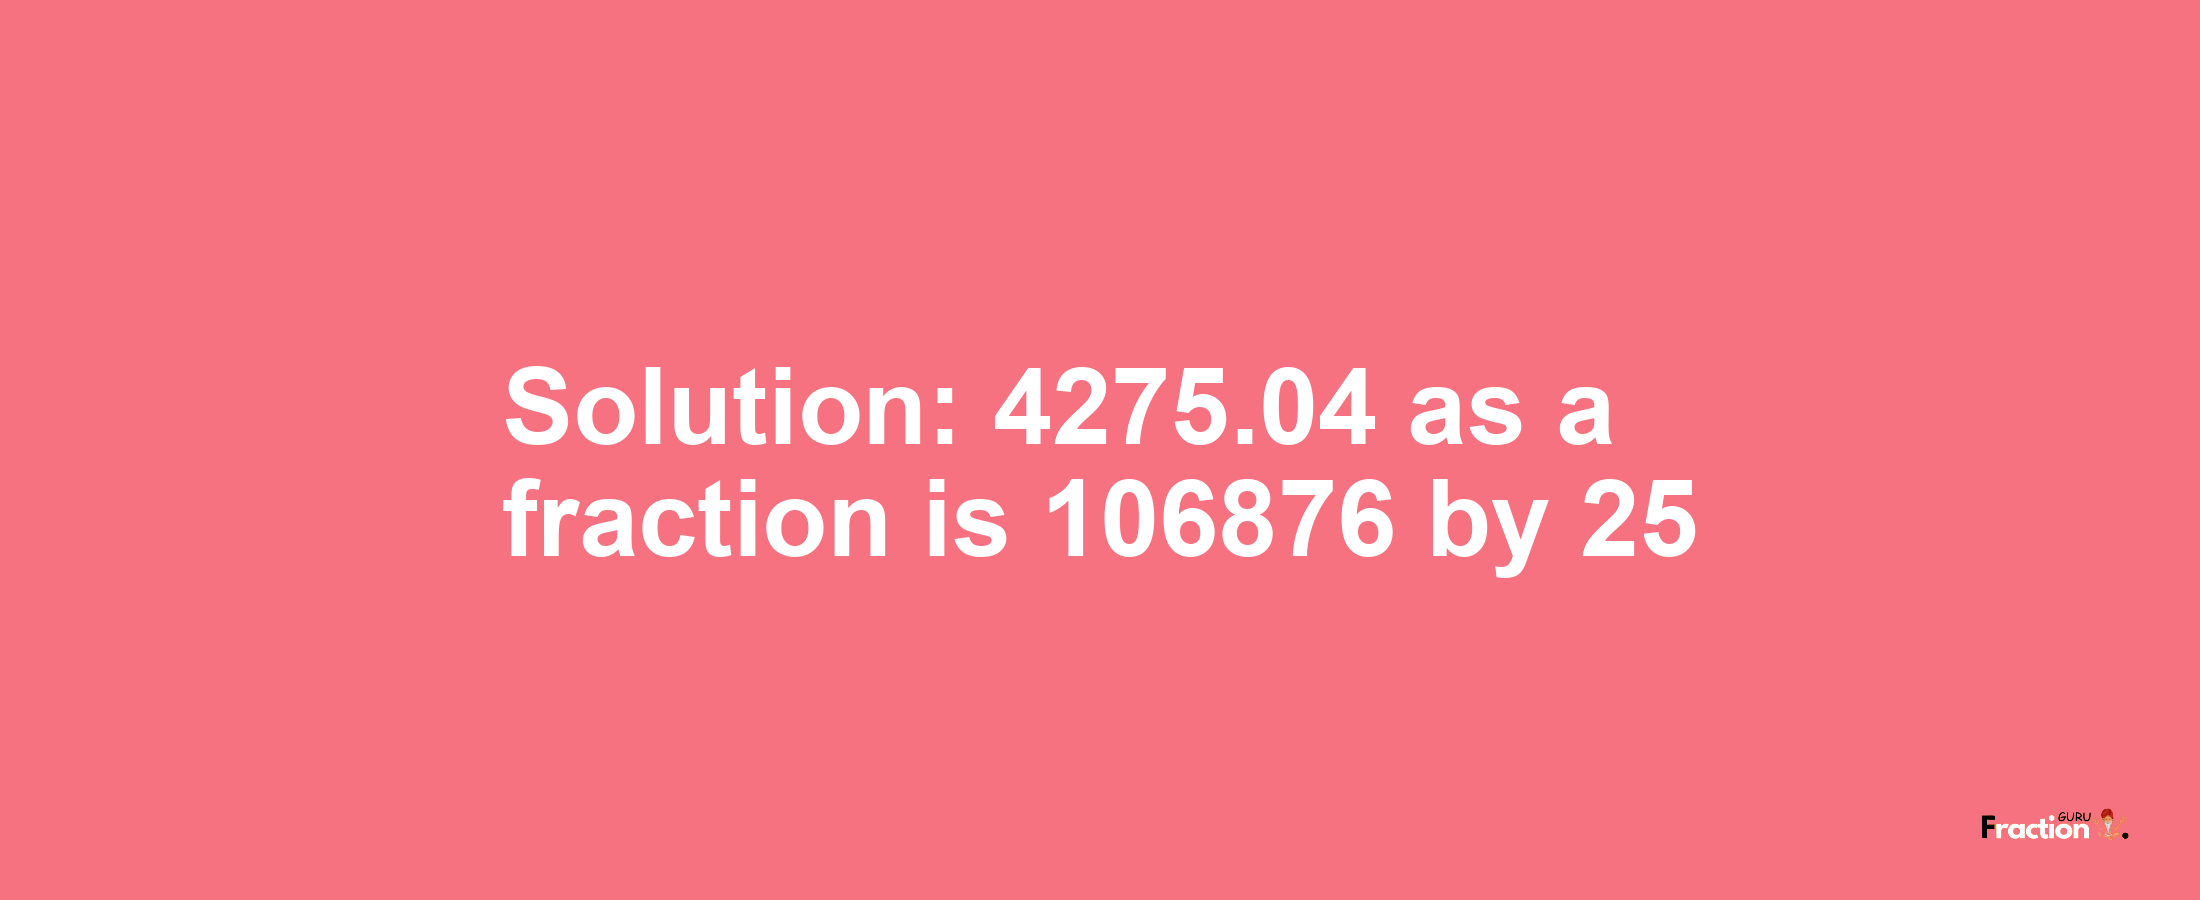 Solution:4275.04 as a fraction is 106876/25